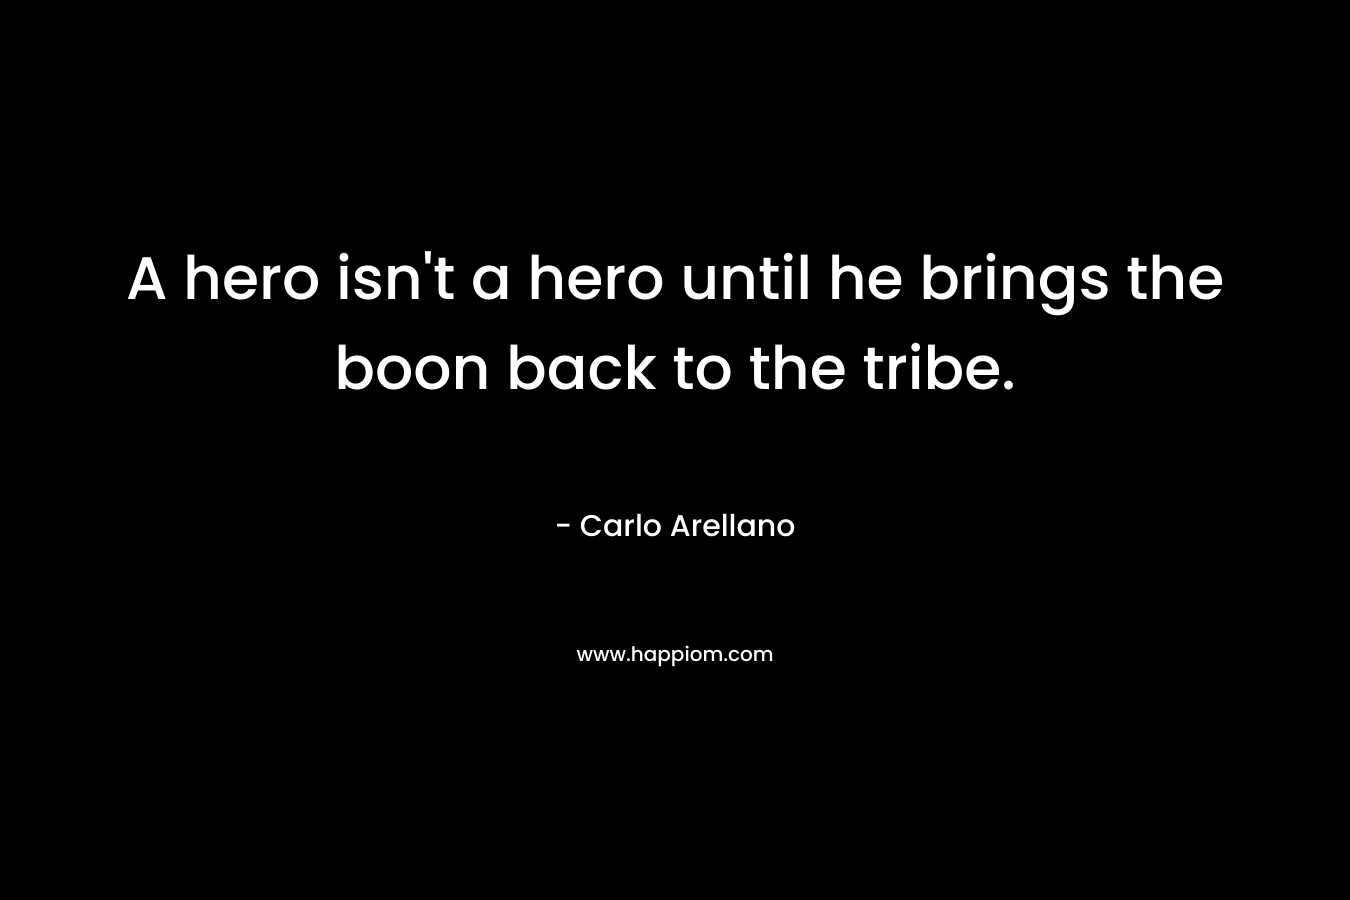 A hero isn't a hero until he brings the boon back to the tribe.